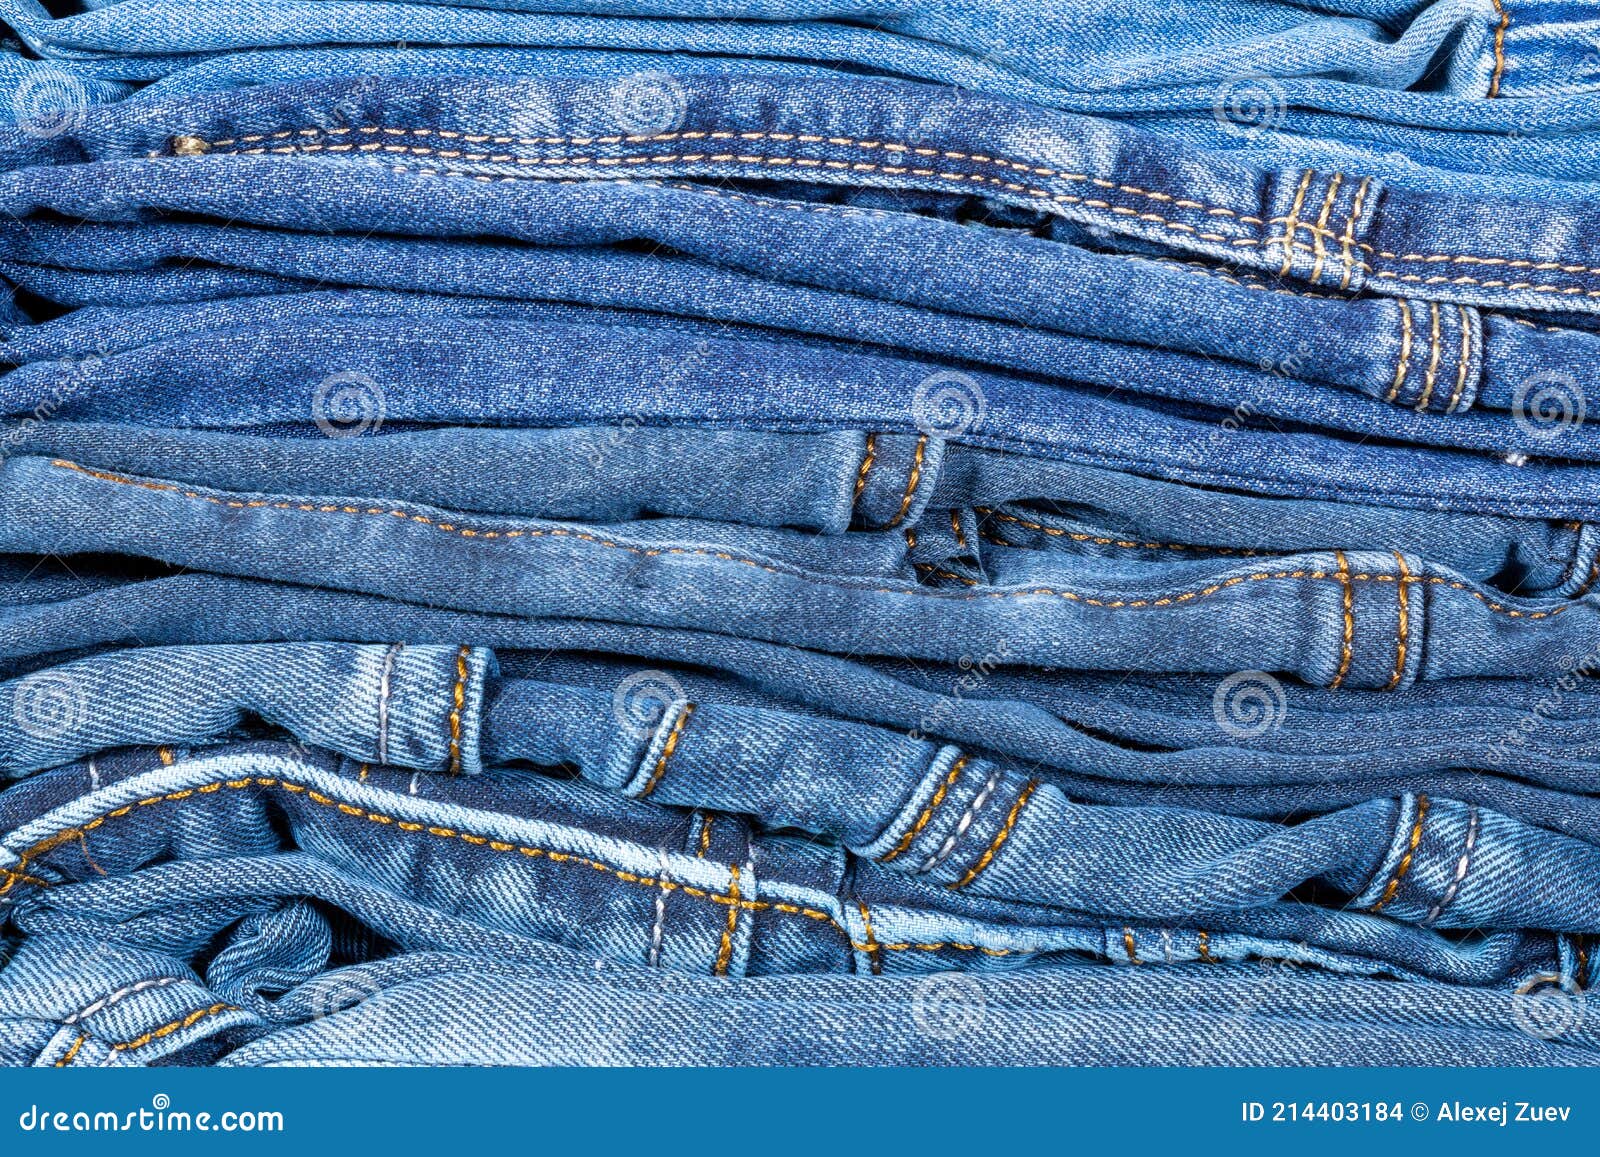 Denim Trousers Folded in a Pile on a Store Window Stock Photo - Image ...